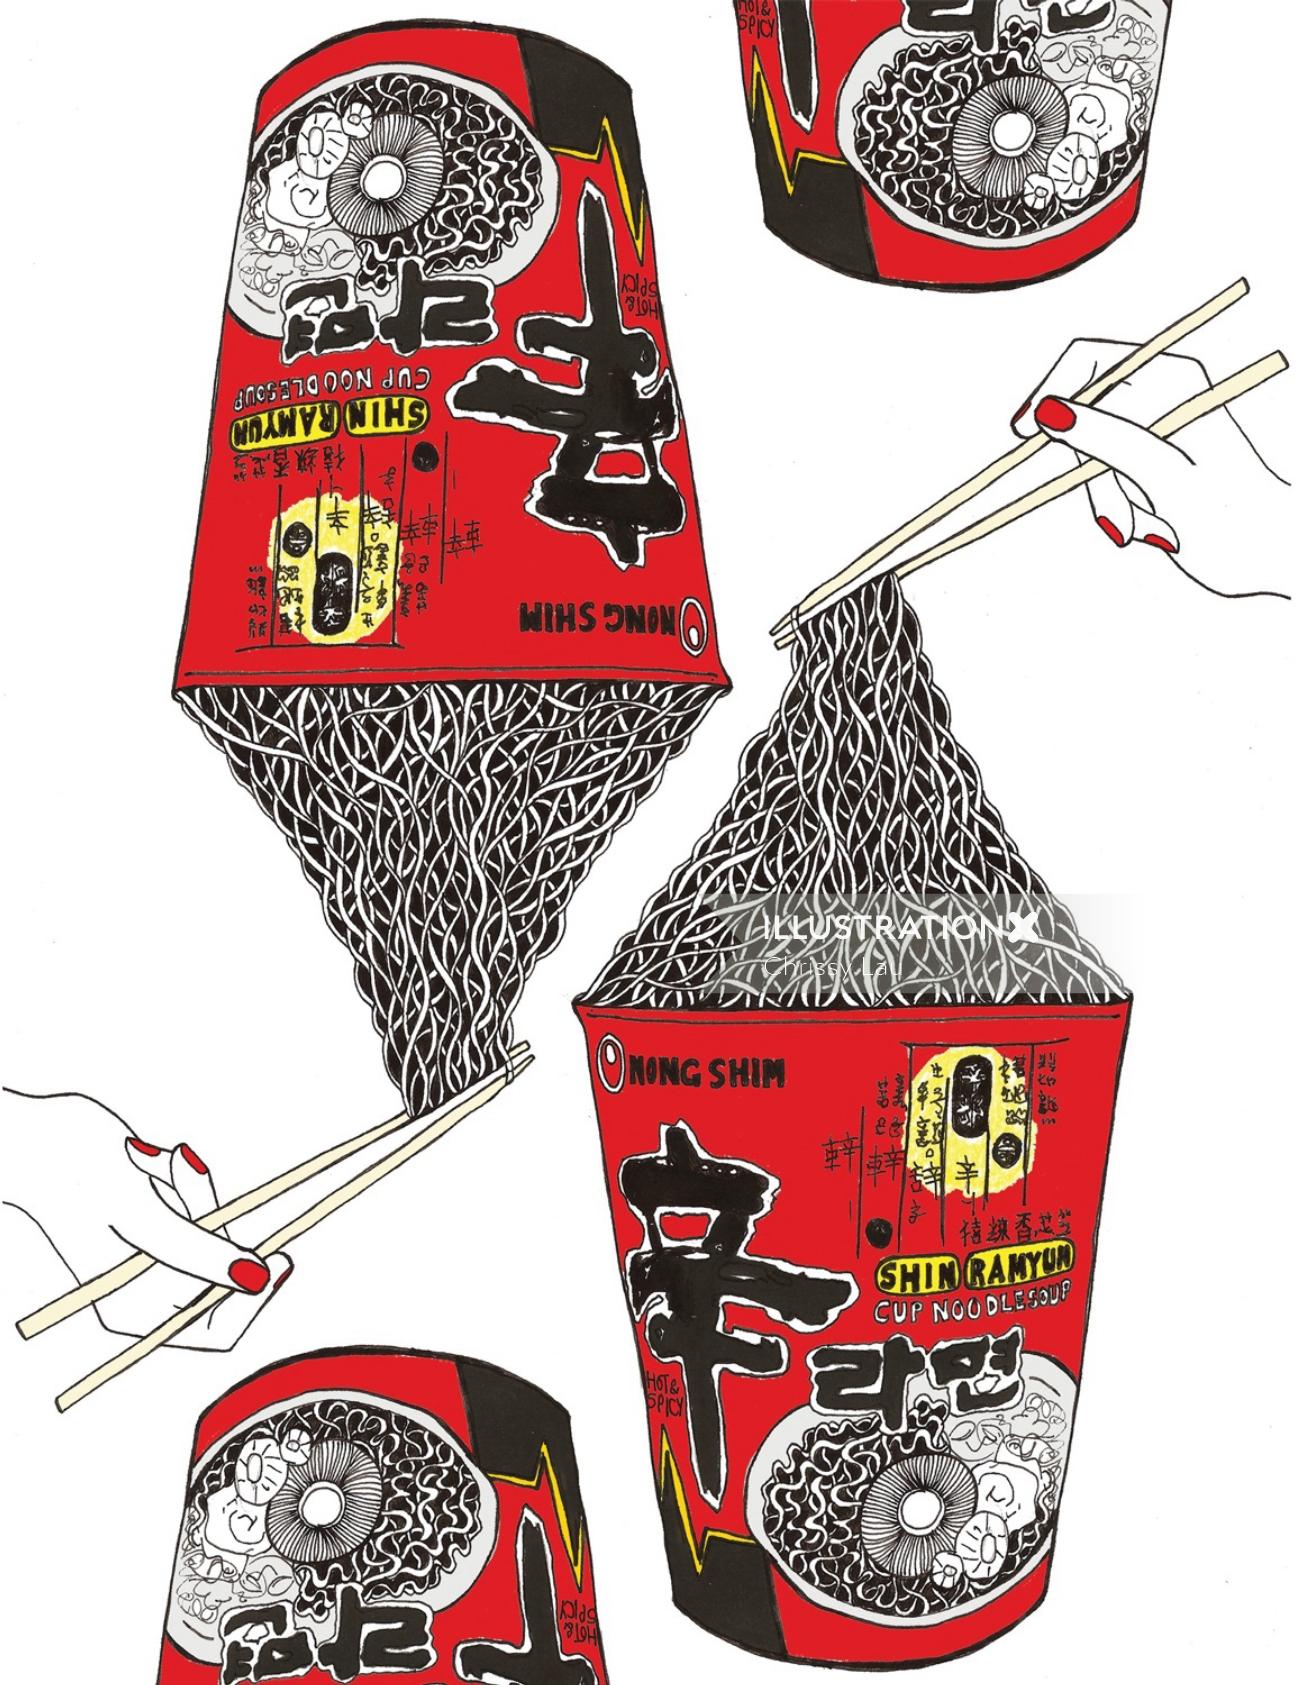 Cup noodles package artwork by Chrissy Lau